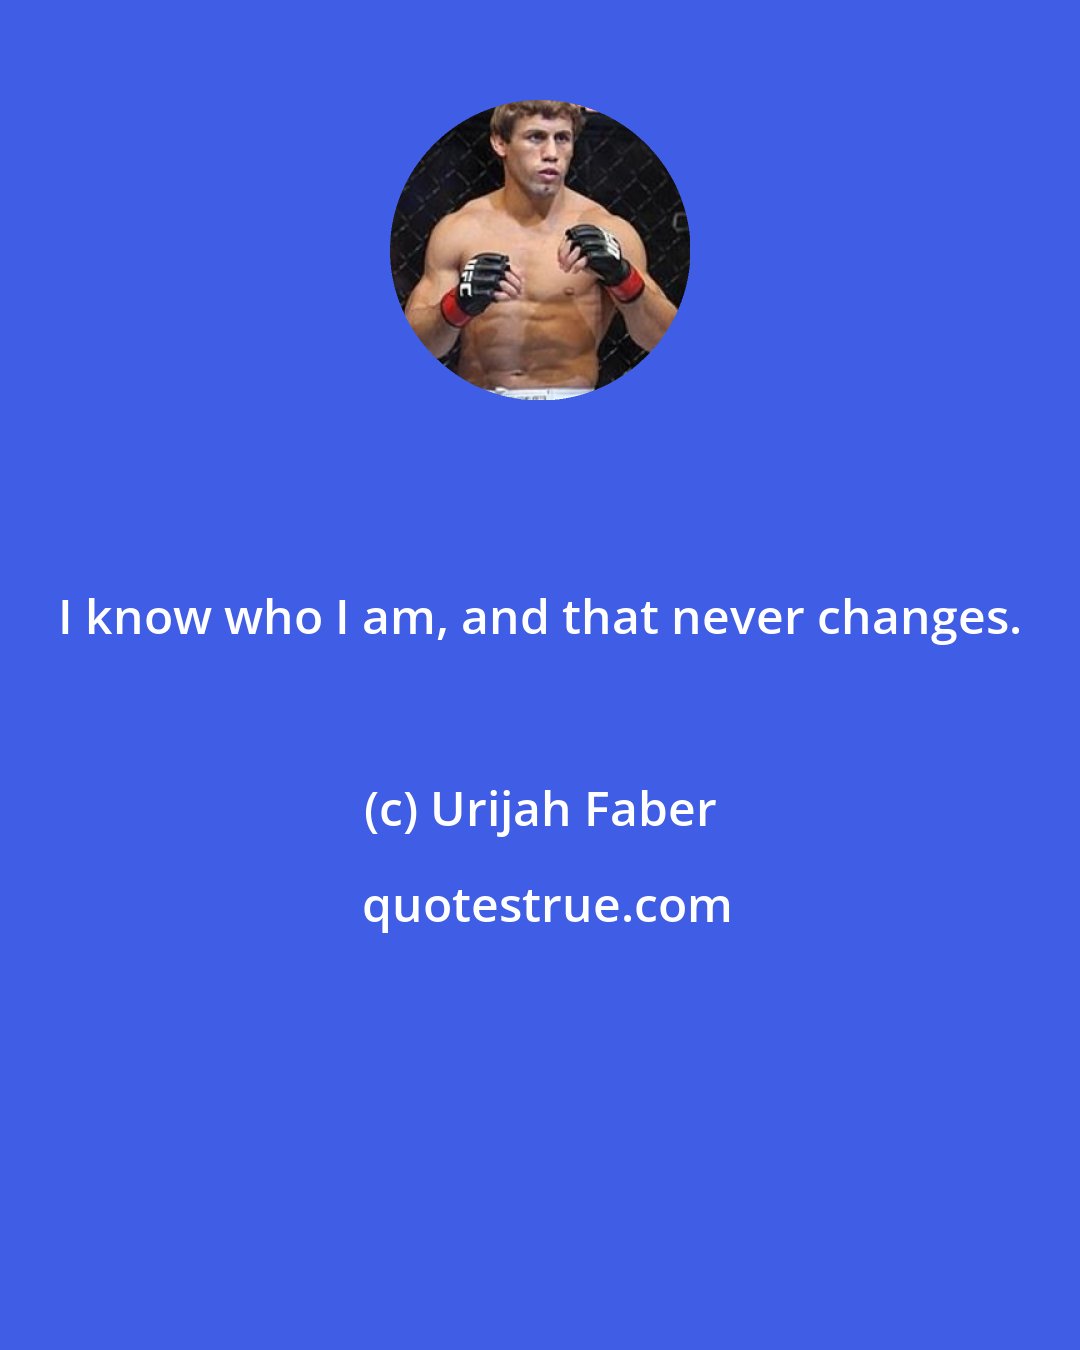 Urijah Faber: I know who I am, and that never changes.